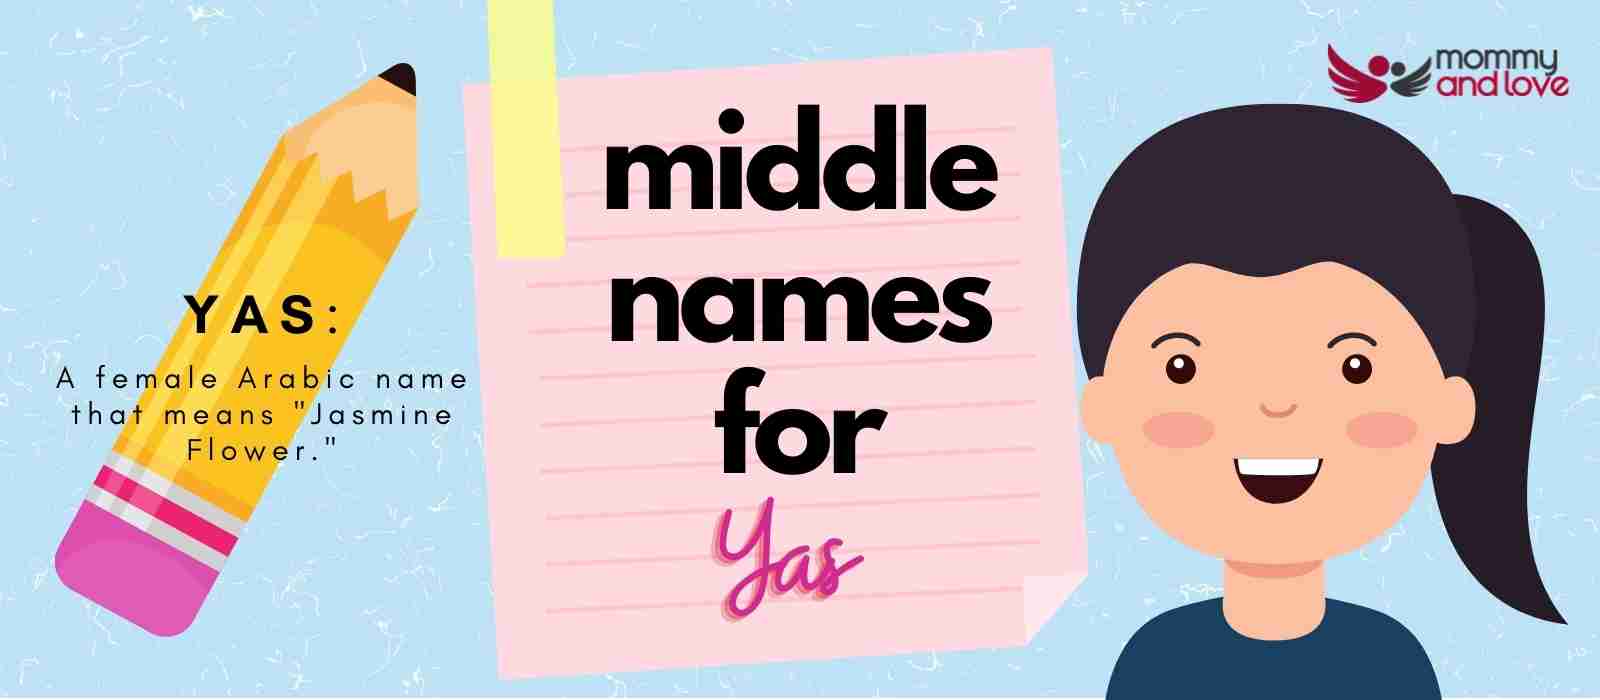 Middle Names for Yas